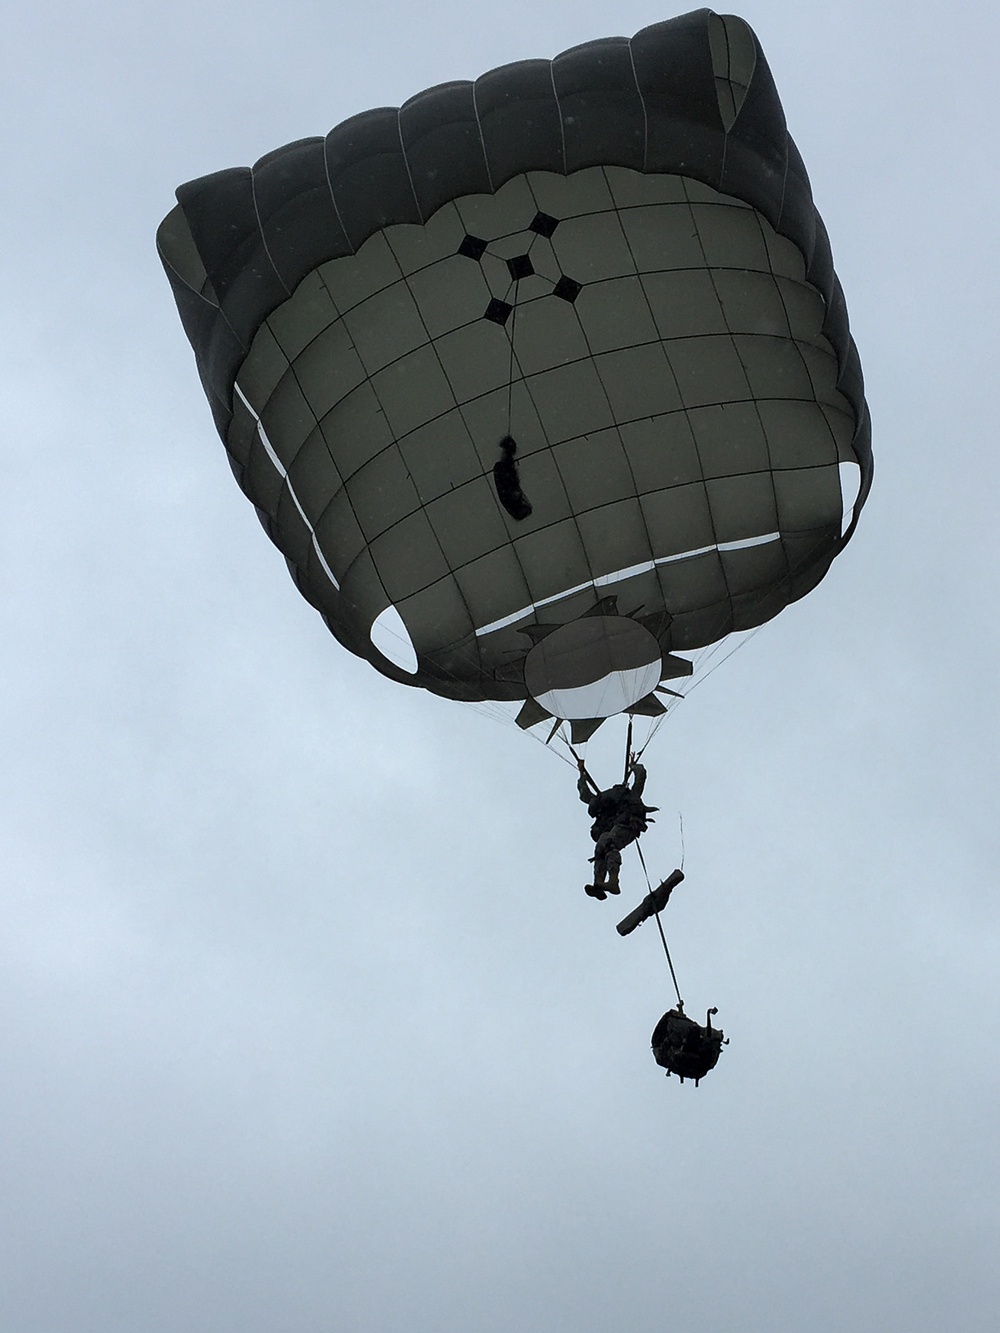 A day in the 82nd Airborne Division